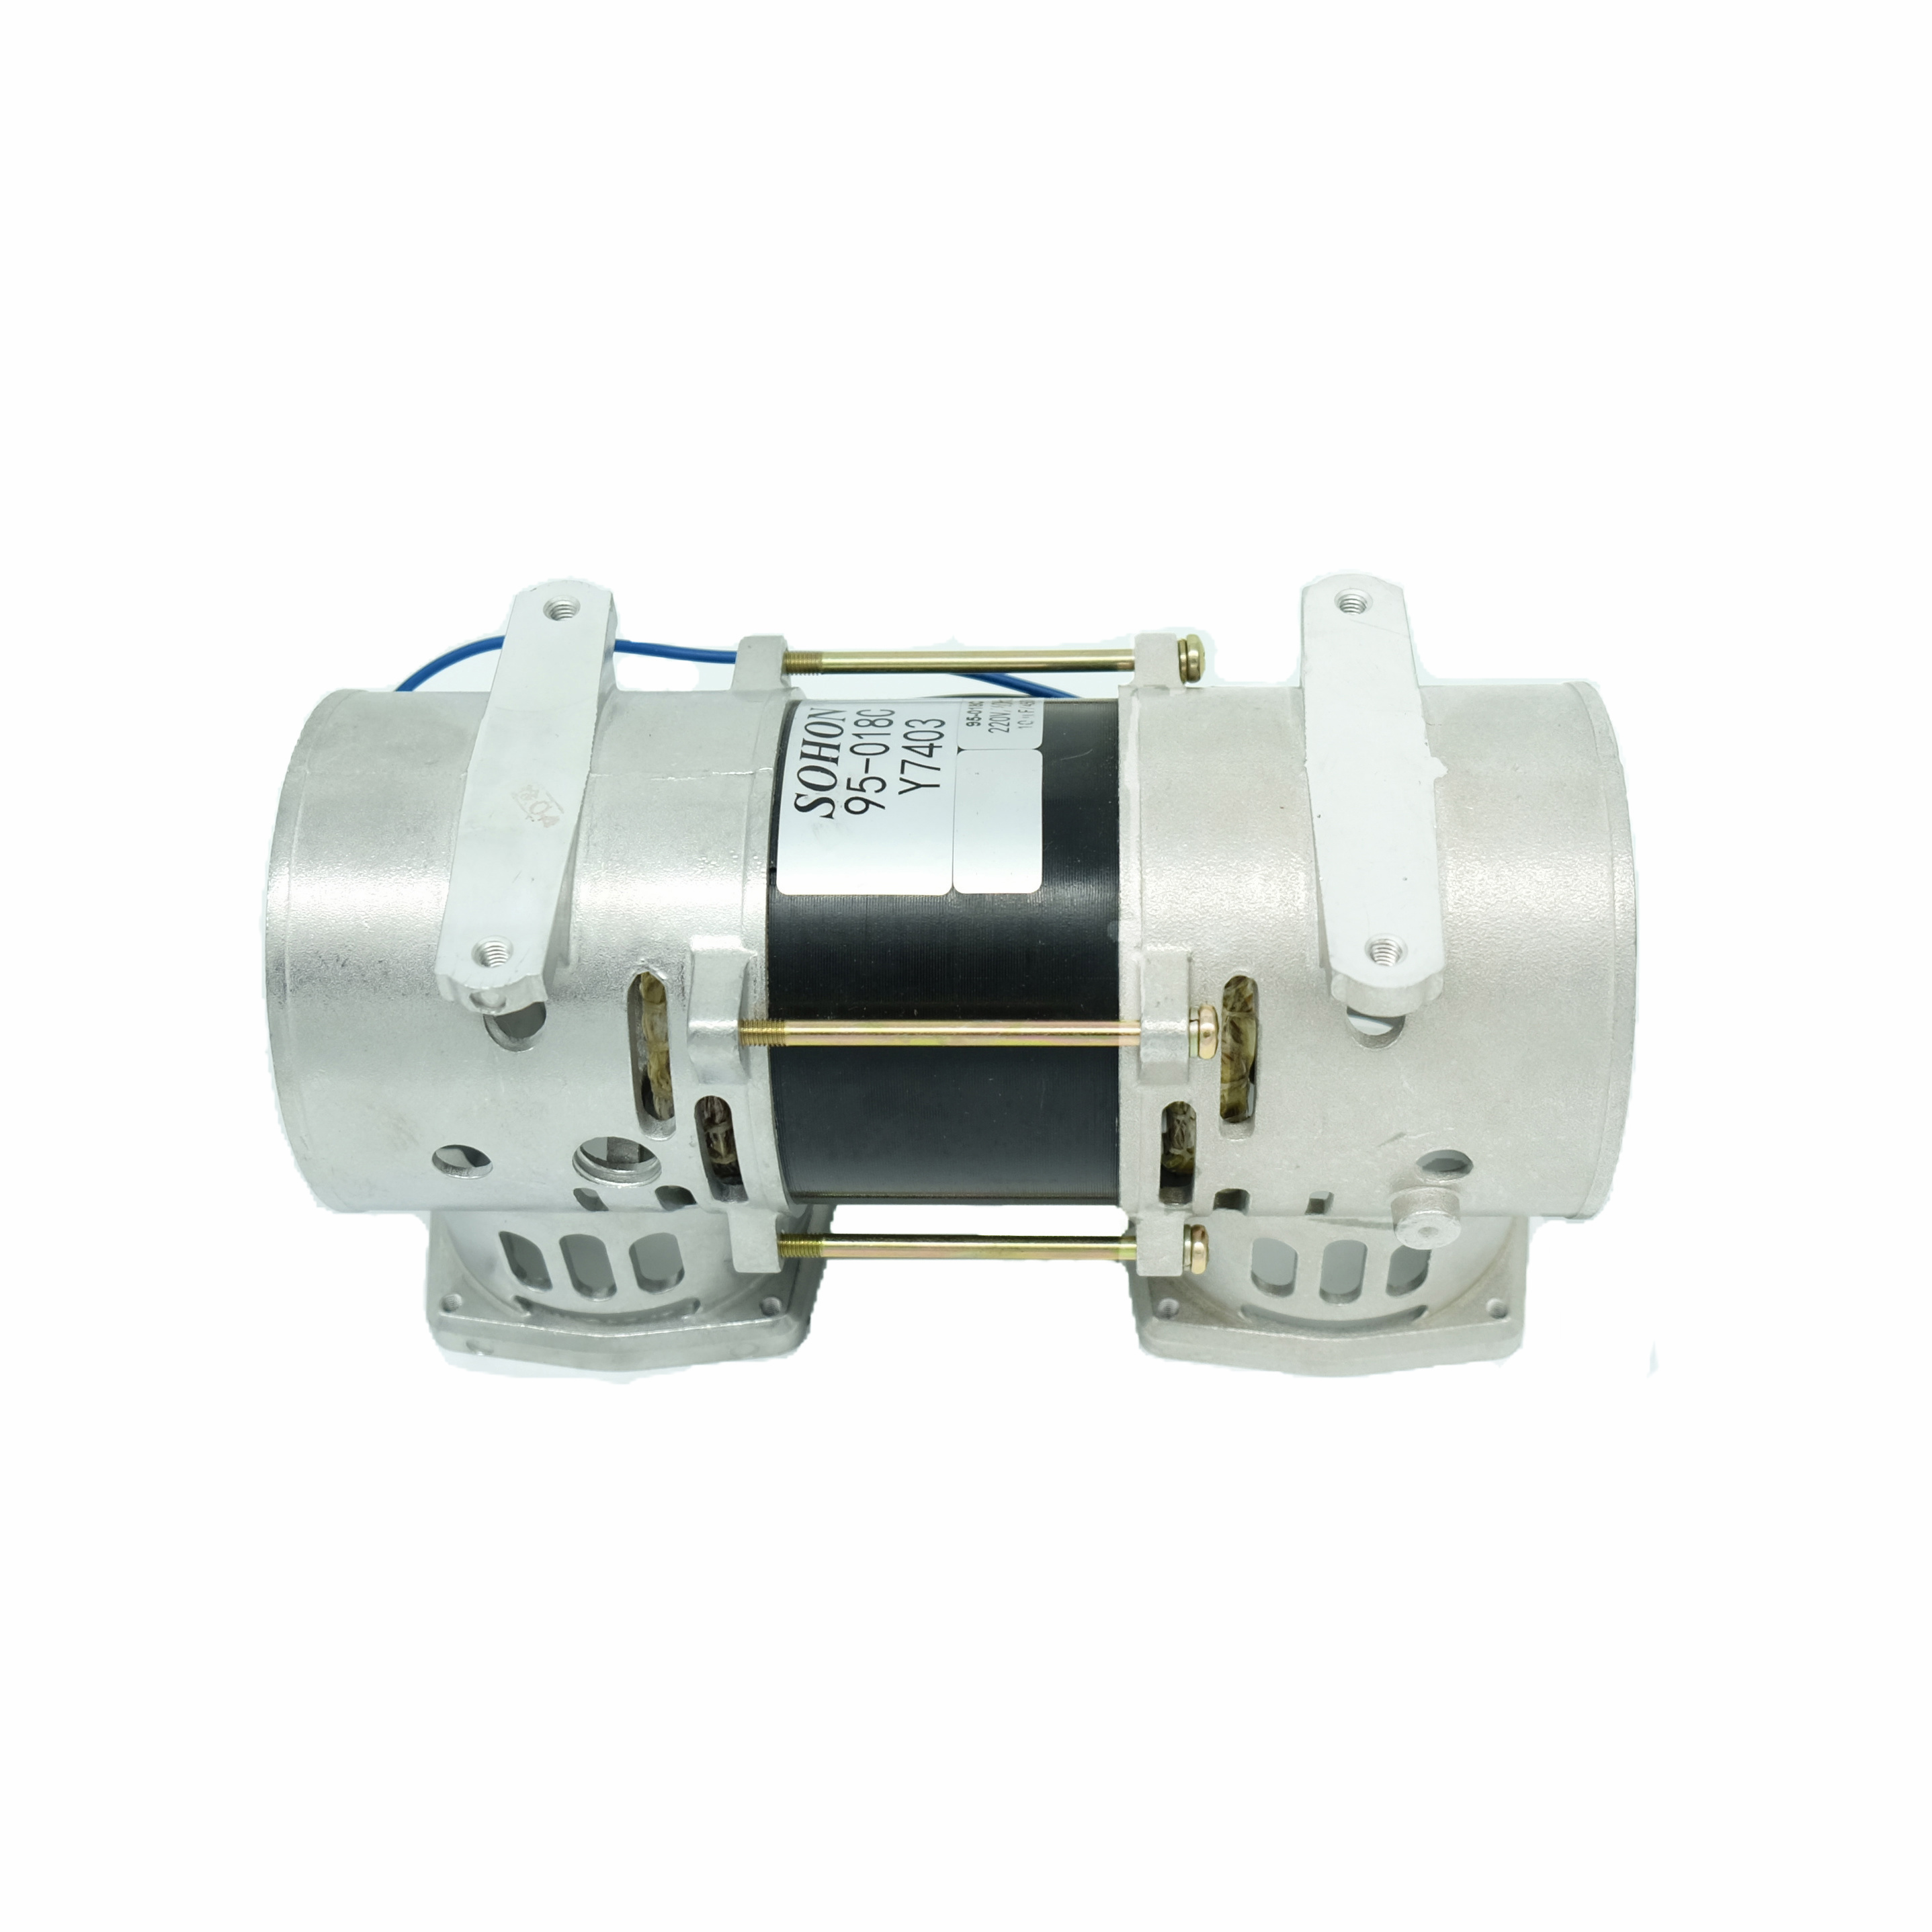 95-018 AC Motor for Medical Devices